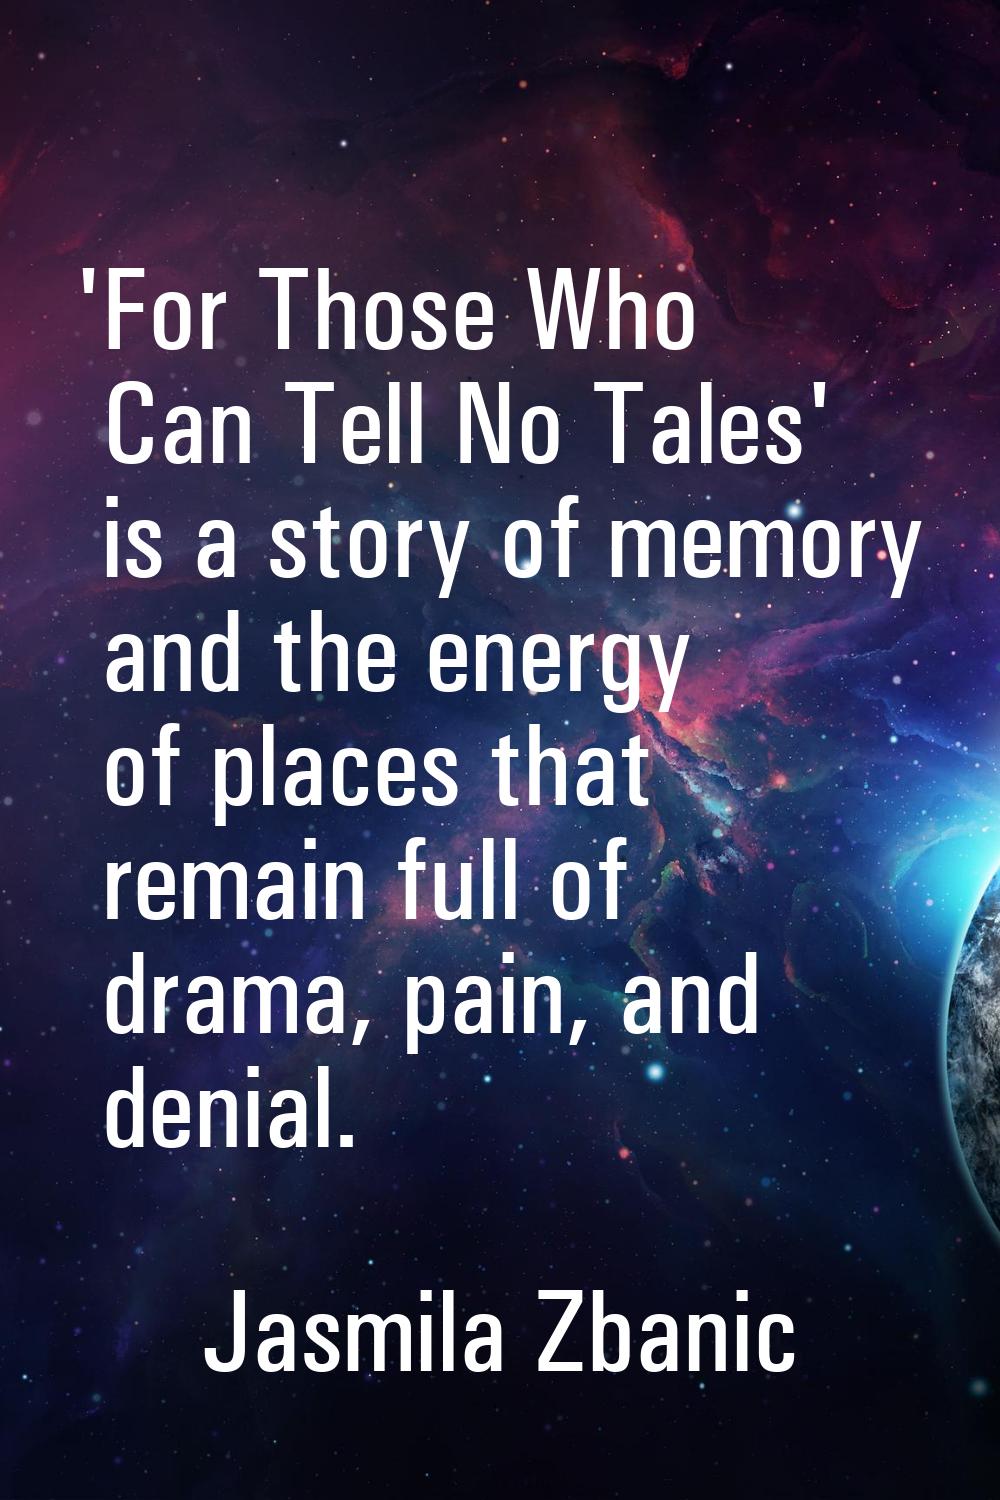 'For Those Who Can Tell No Tales' is a story of memory and the energy of places that remain full of